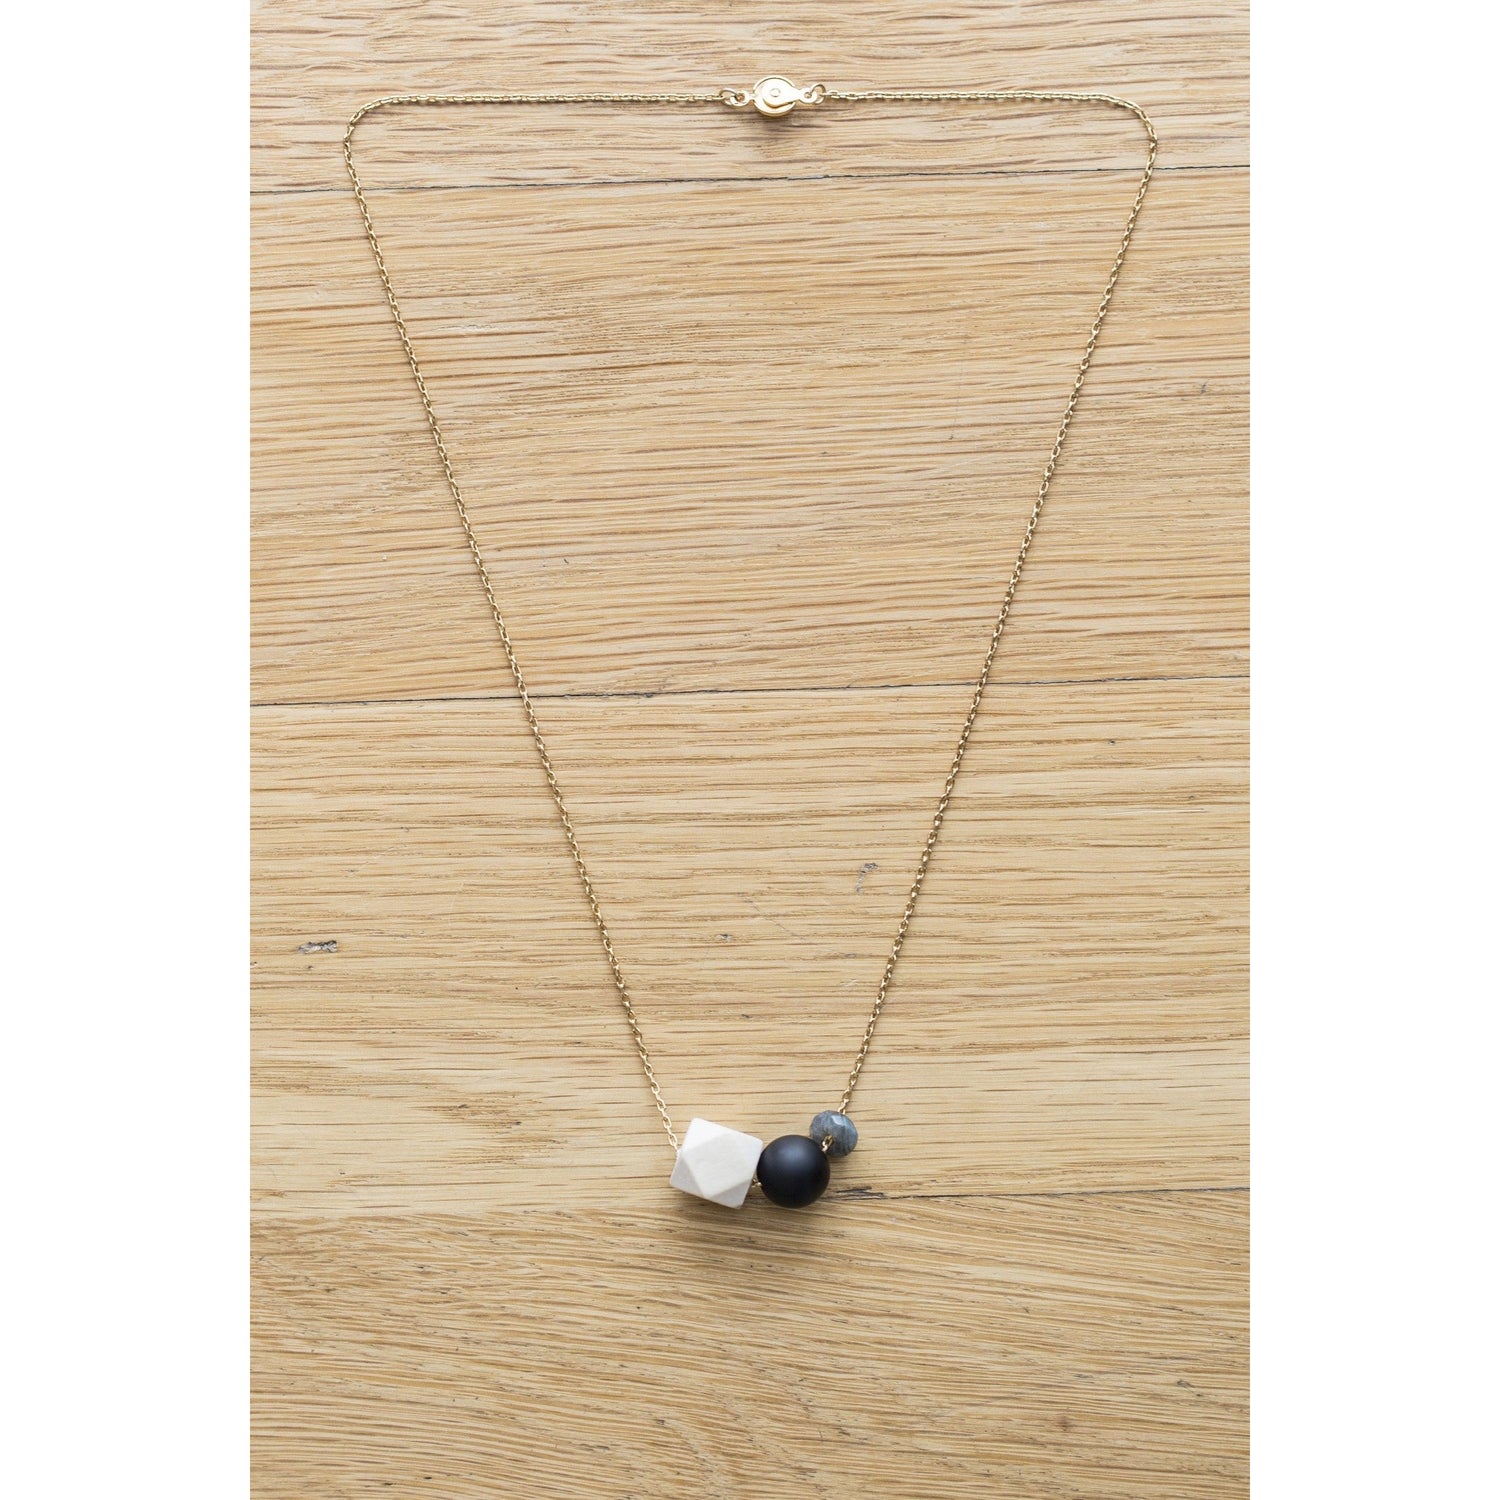 Wood, Black Agate and Gemstone Bead on Gold Chain - Tittup Unique Aromatherapy & Jewellery